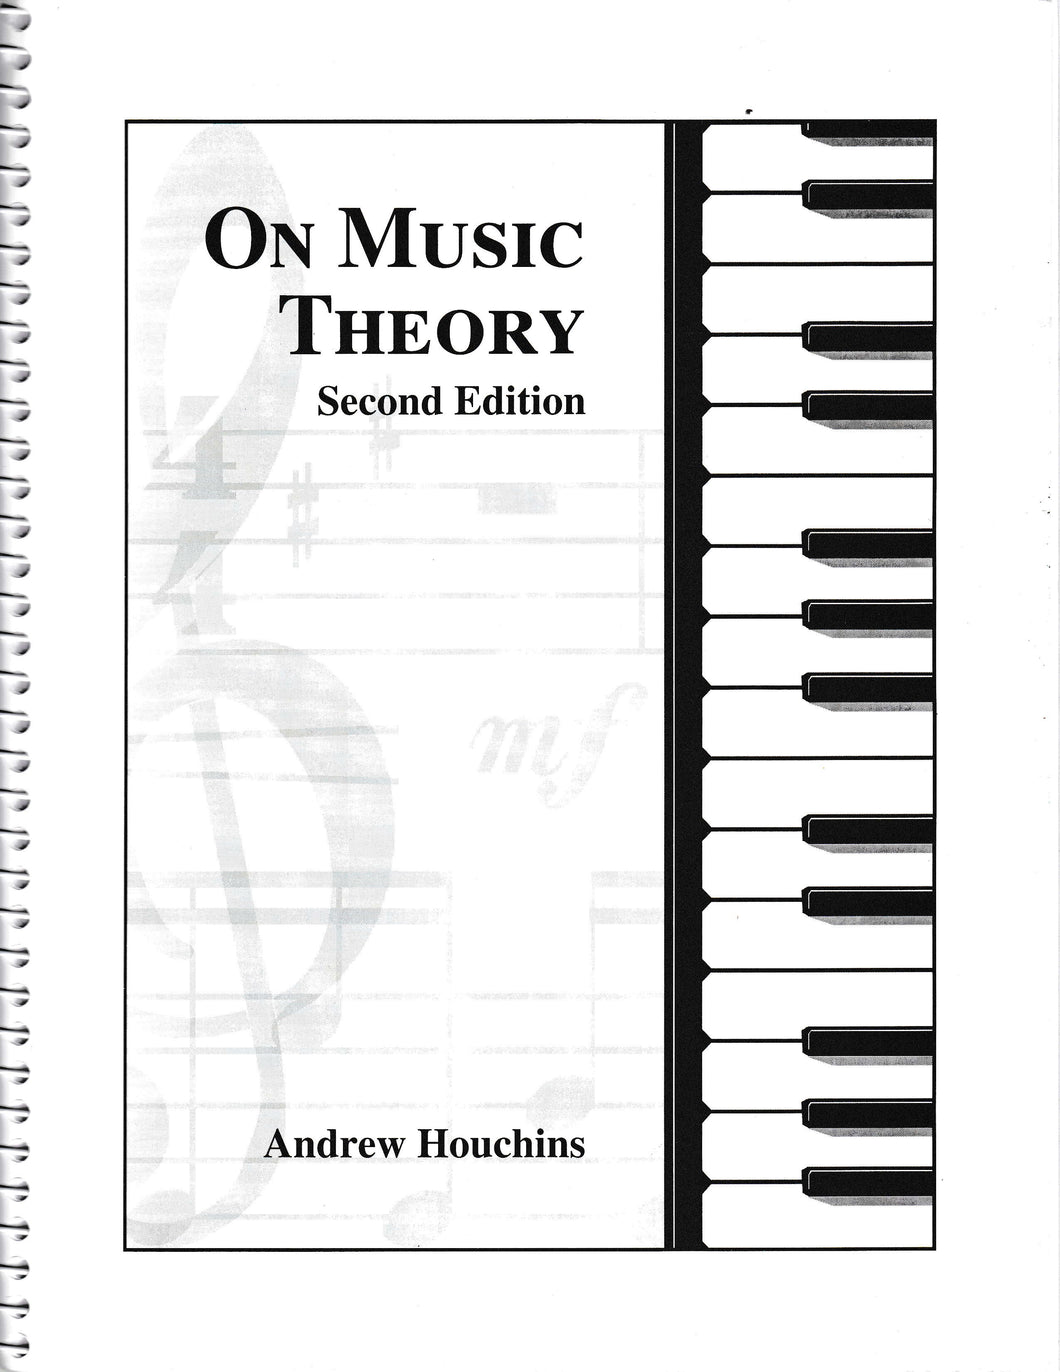 On Music Theory, Second Edition